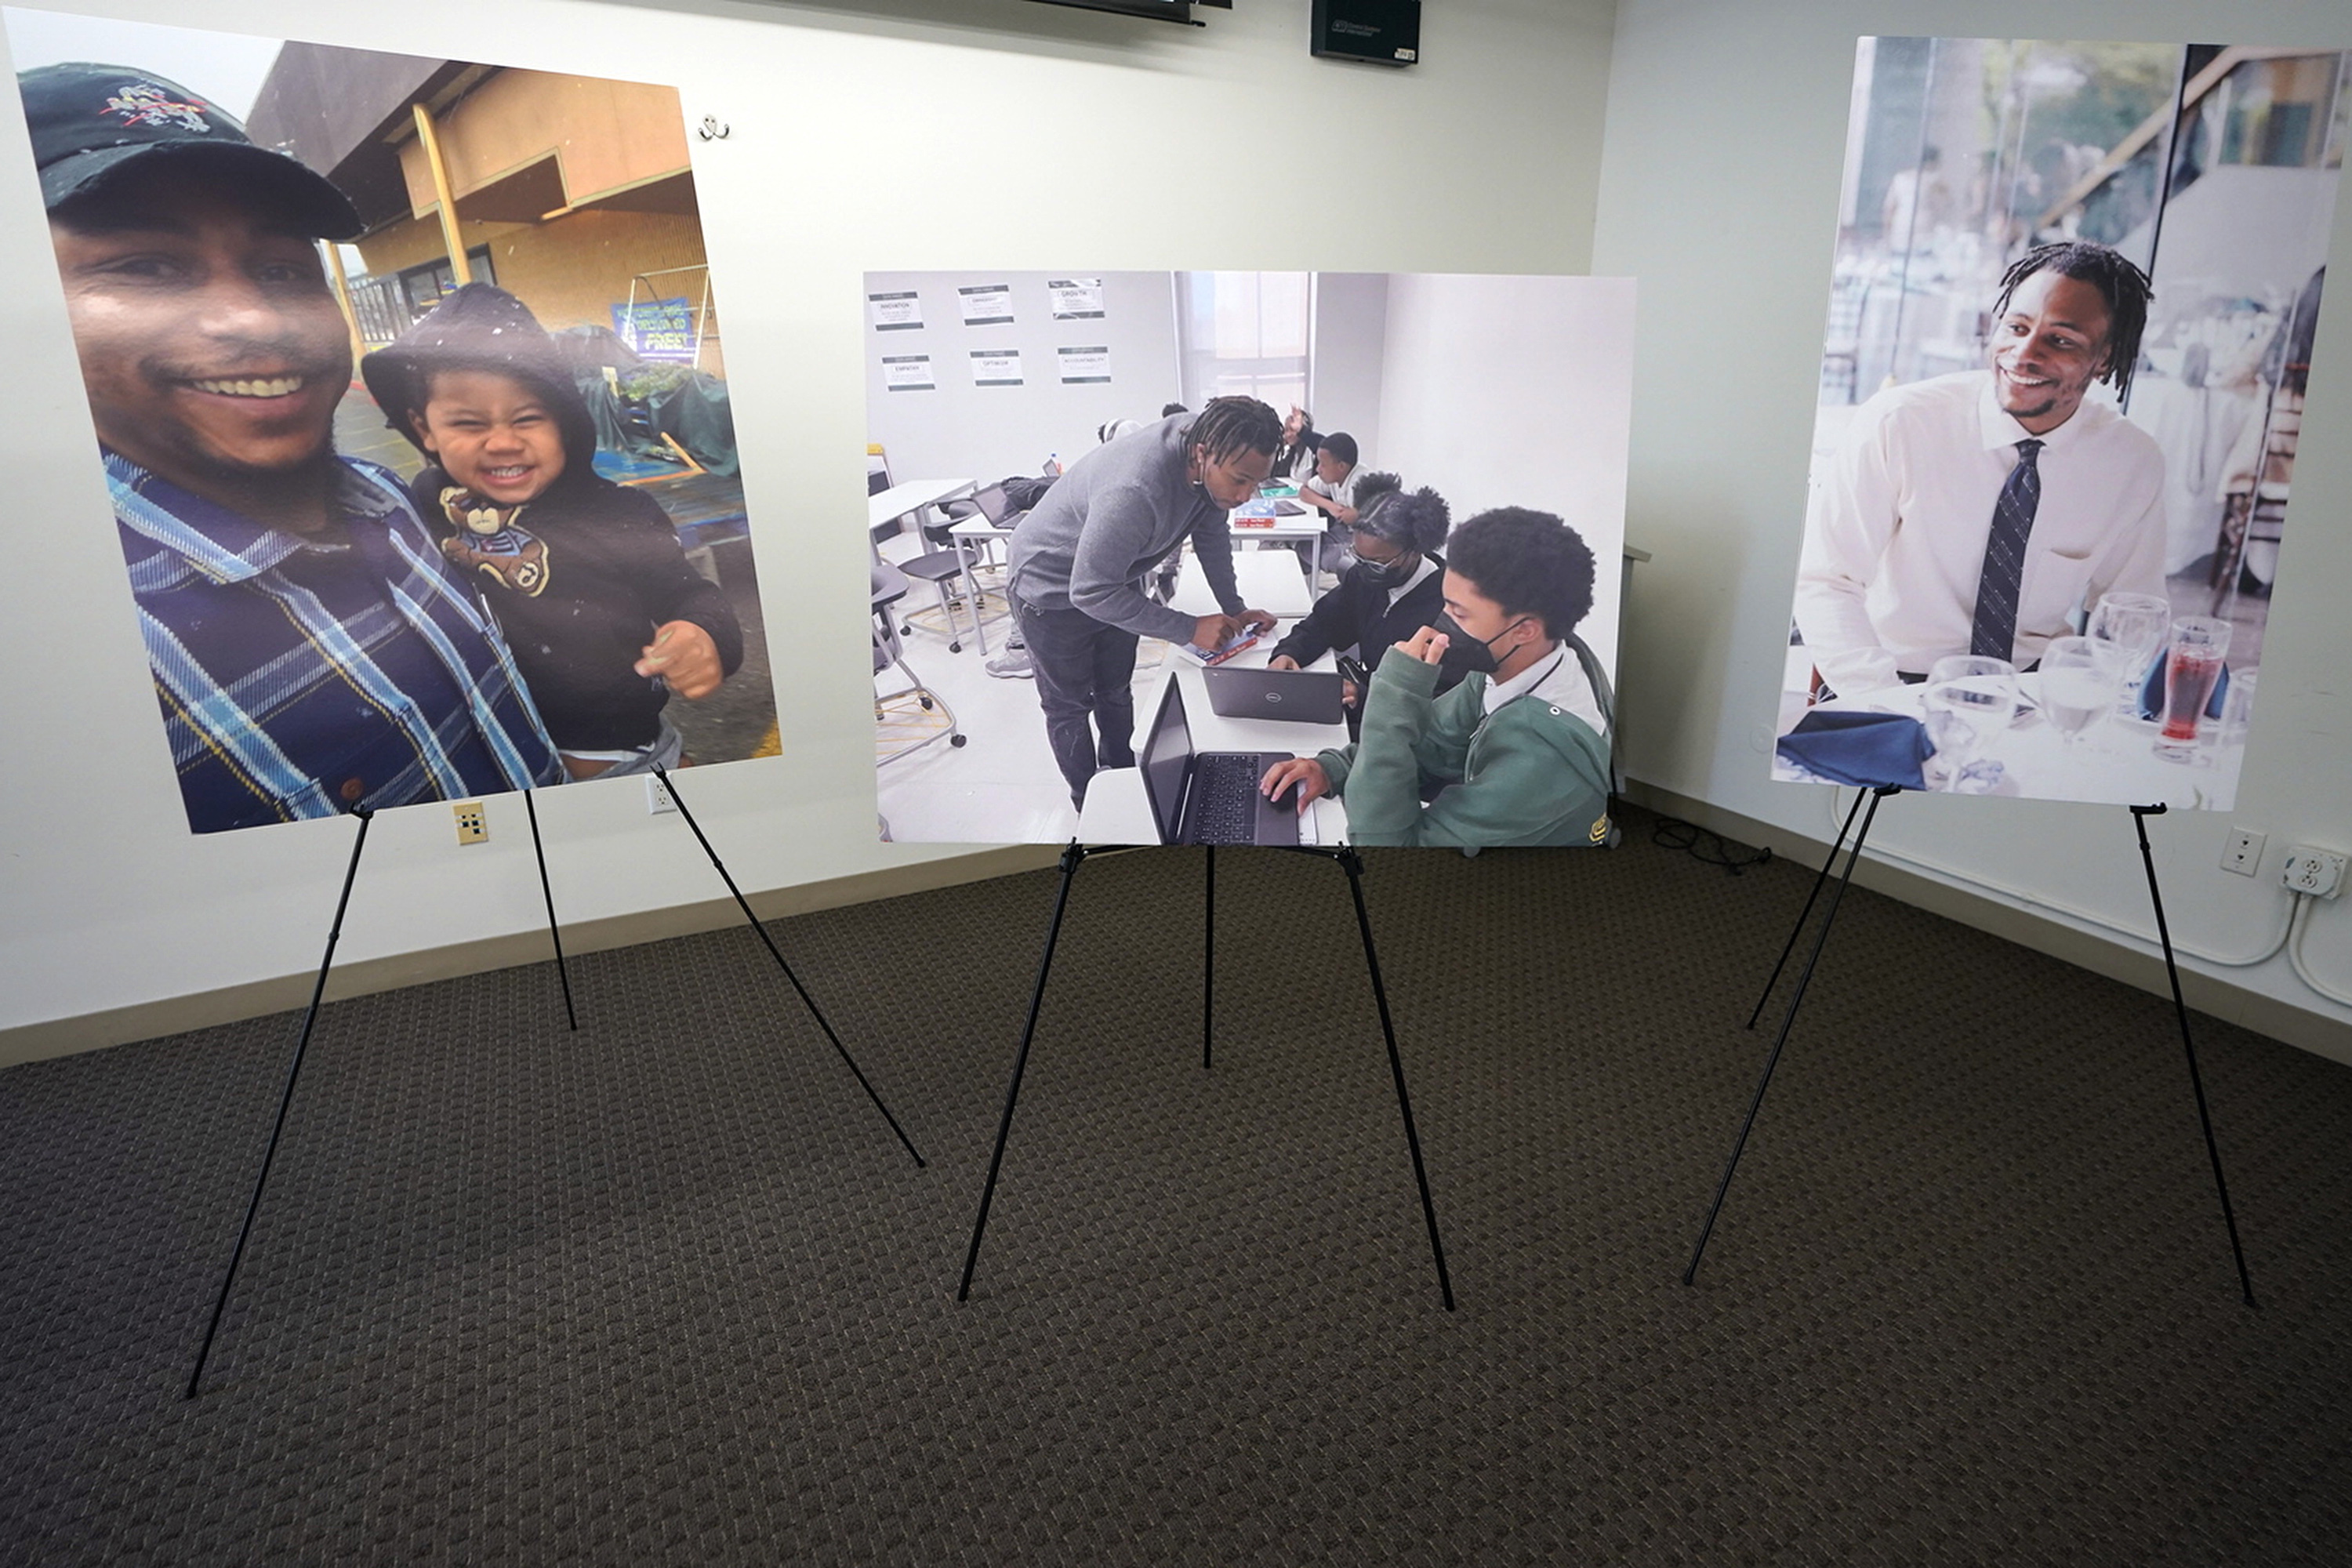 Pictures of 31-year-old teacher, Keenan Anderson, who was tasered multiple times during a struggle with LAPD officers in Venice and died at a hospital, are displayed at news conference.